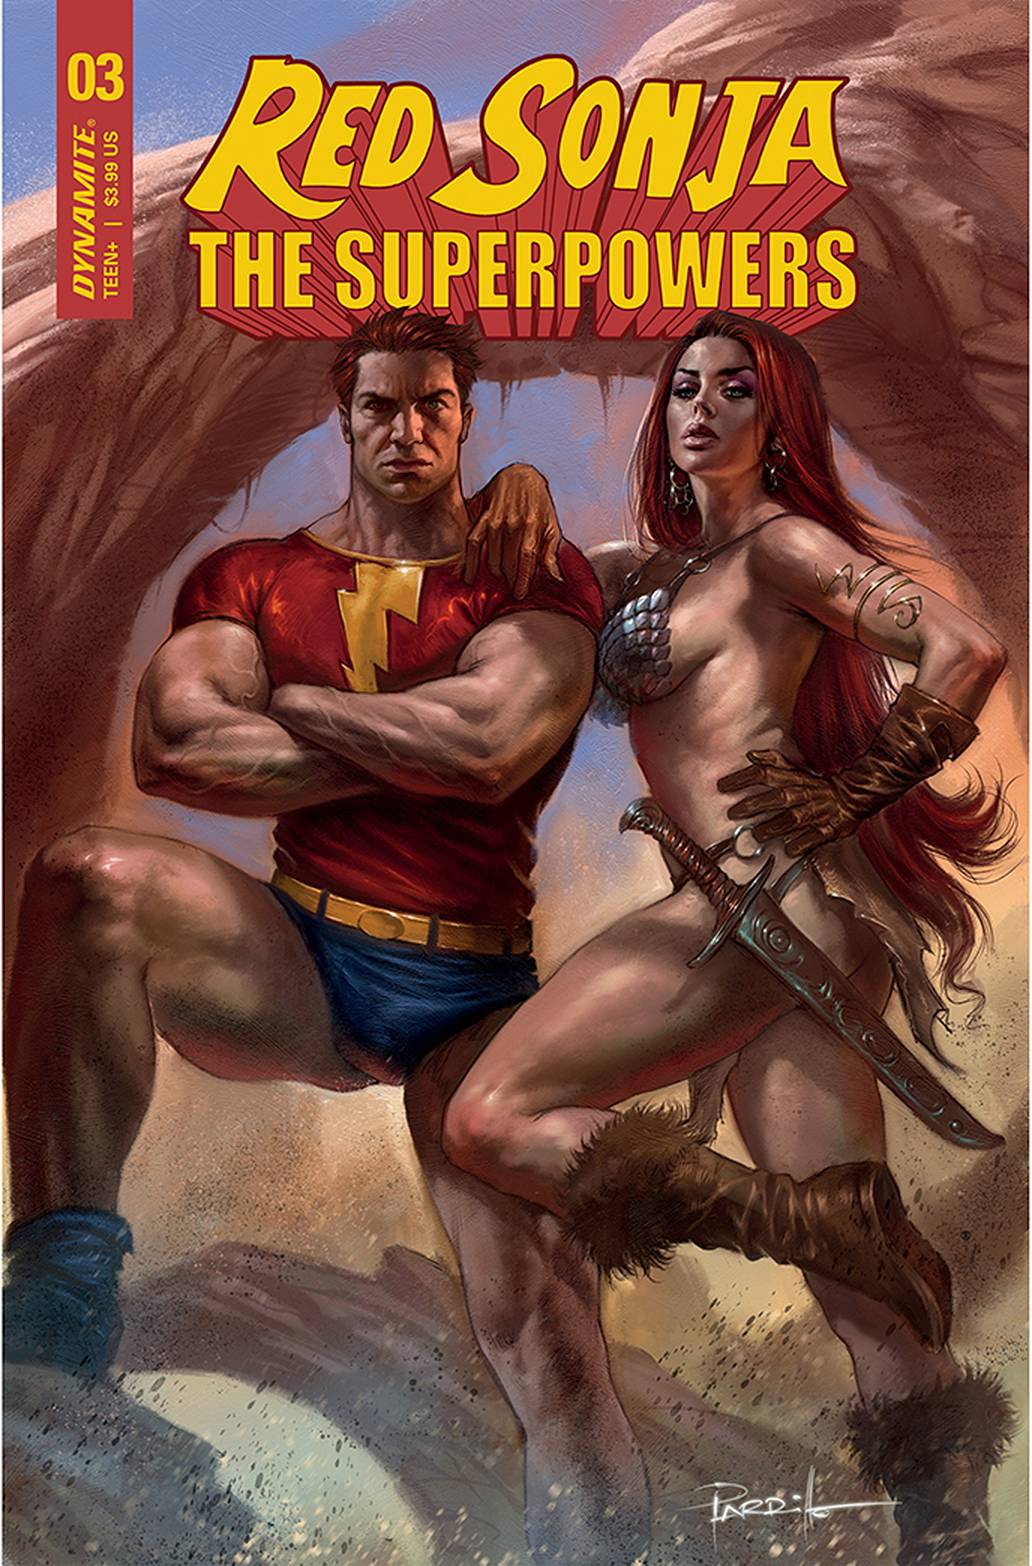 RED SONJA THE SUPERPOWERS #3 CVR A PARRILLO